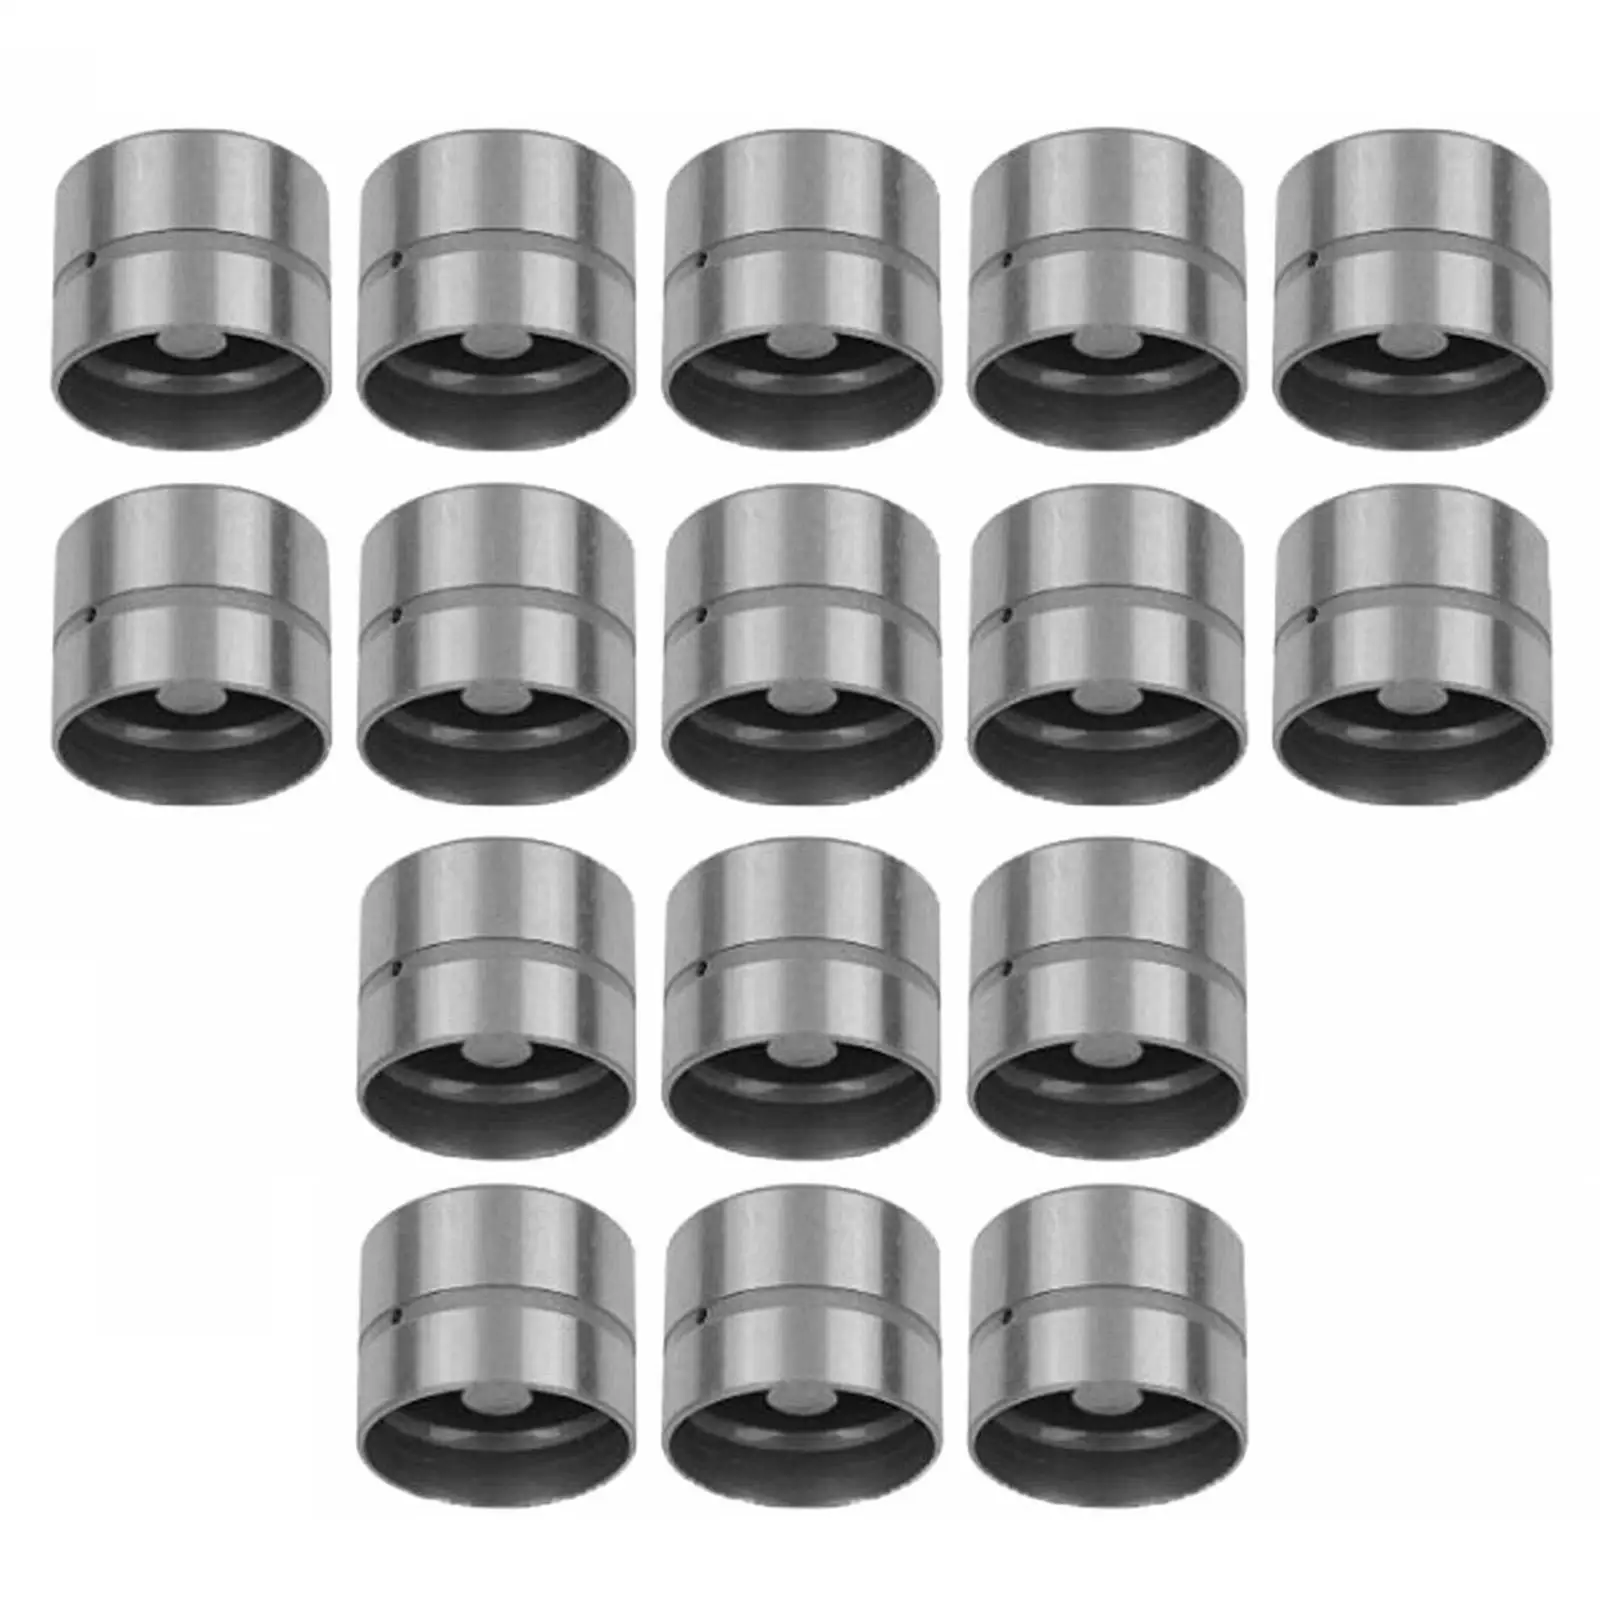 16x Hydraulic Lifters Tappets Replaces Easy to Install Professional Accessories for 20XE C20XE 420011810 90570967 85000600